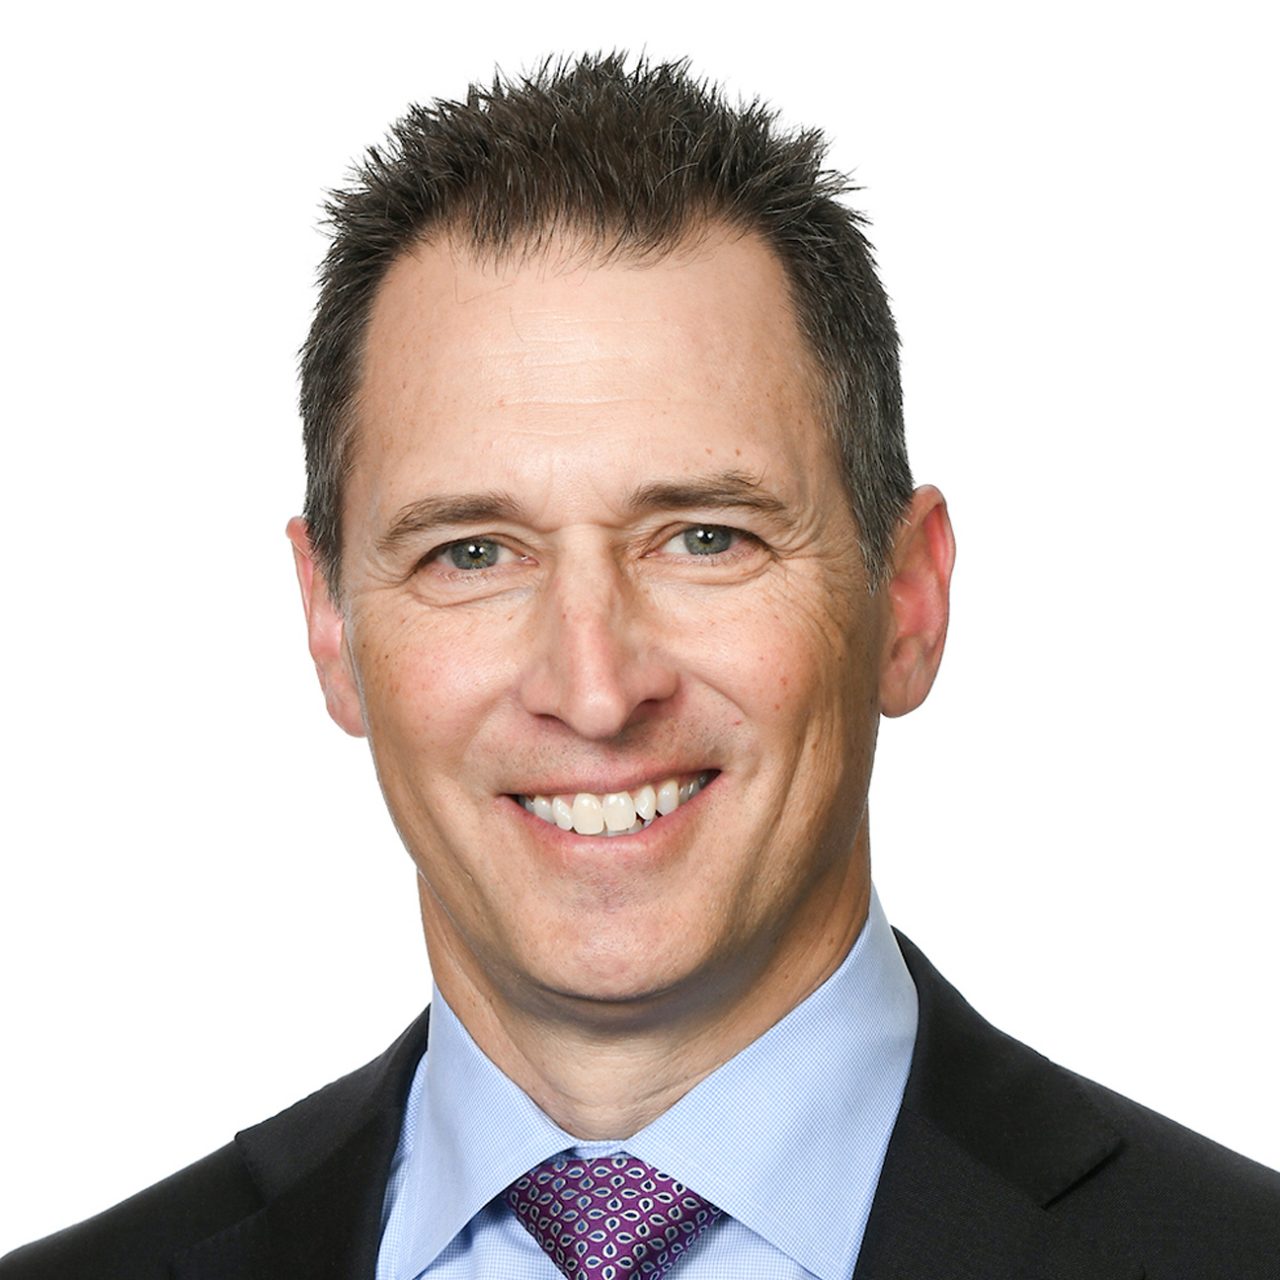 Profile of Tom Amster, Senior Managing Director and Head of Financial Sponsors Group for Macquarie Capital